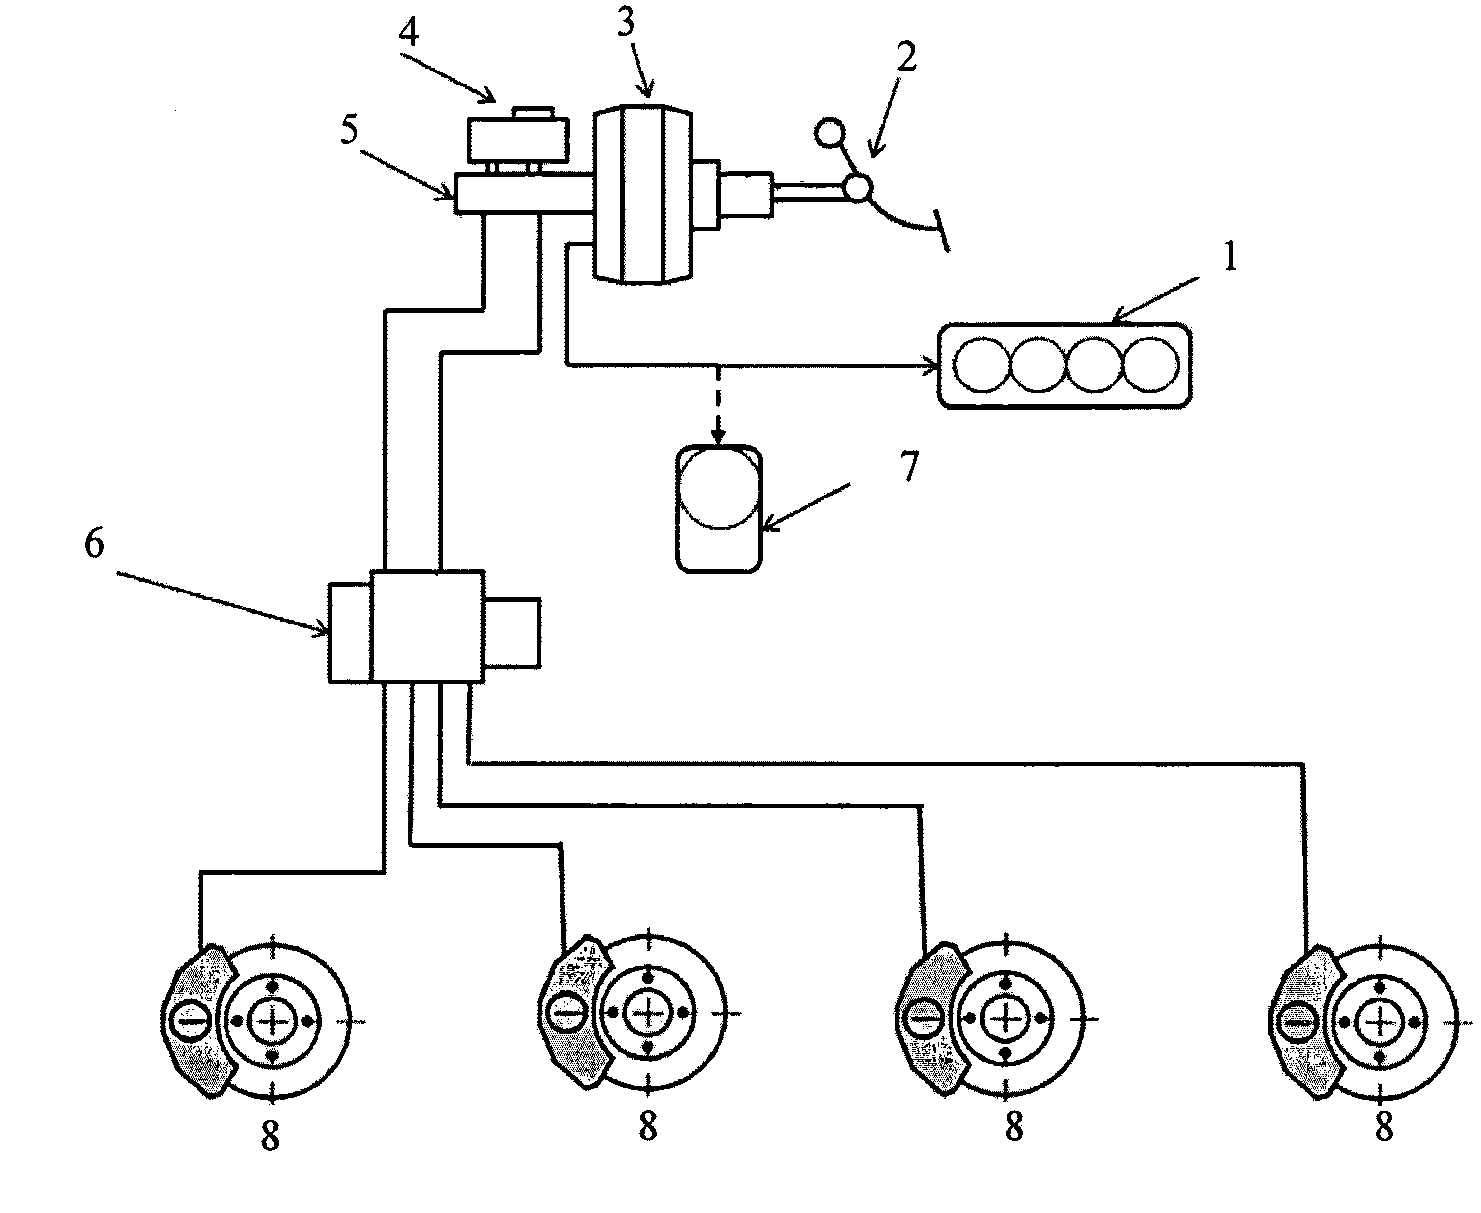 Mechanical-electric-hydraulic compound braking system and corresponding vehicle